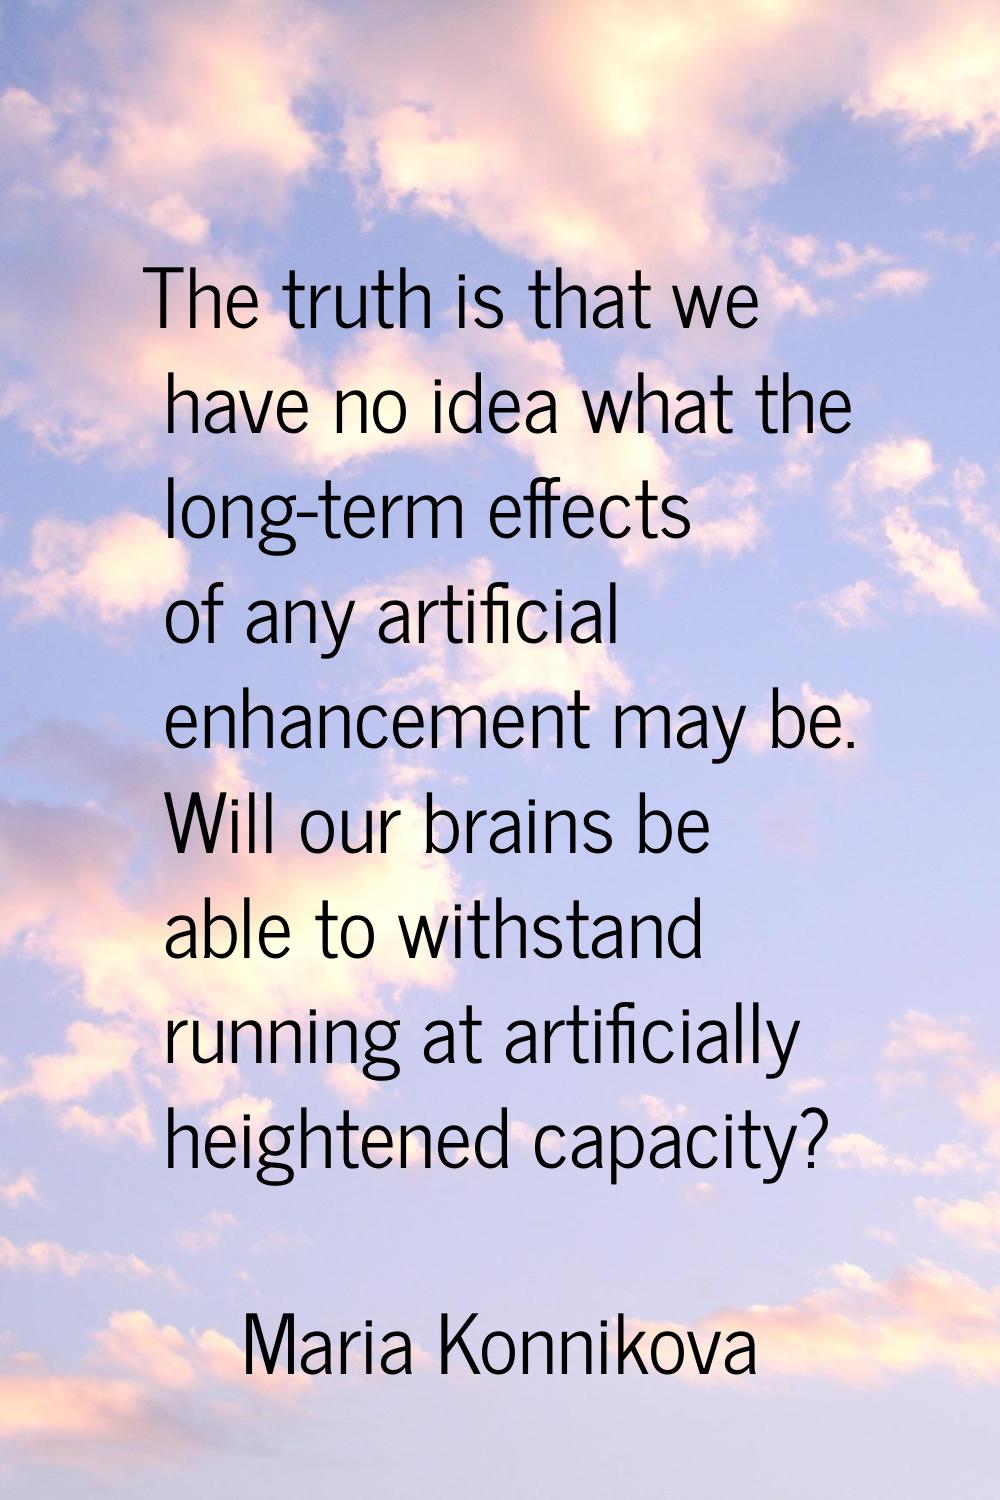 The truth is that we have no idea what the long-term effects of any artificial enhancement may be. 